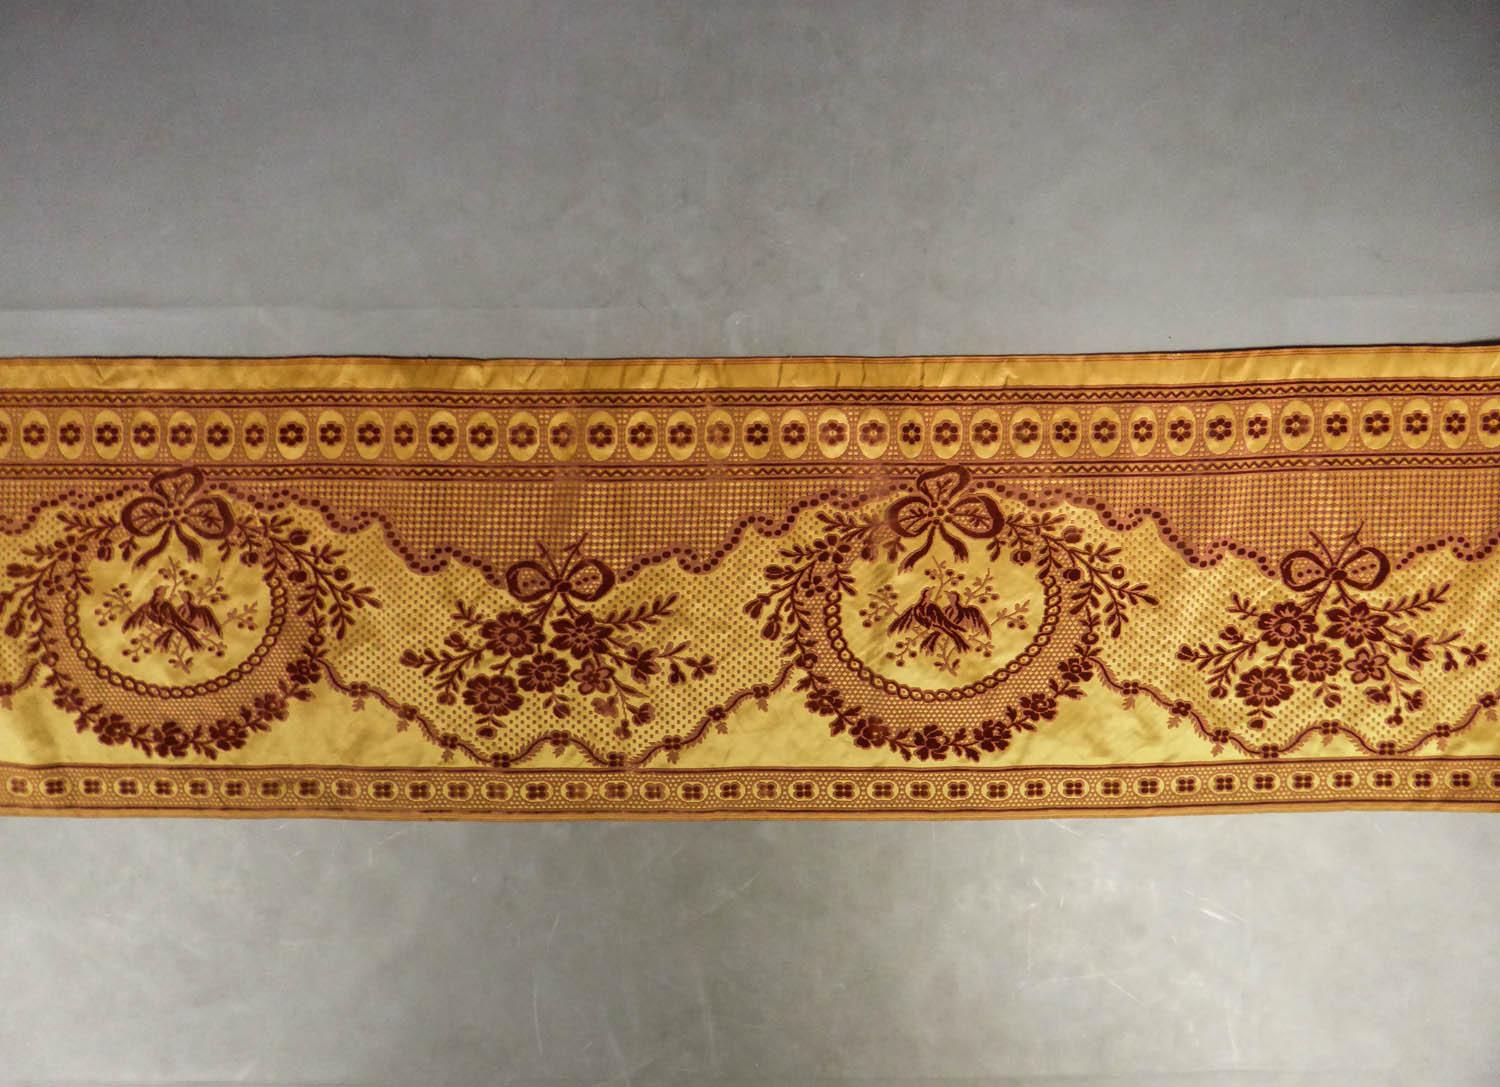 18th-19th century
France

Large border of furniture in Louis XVI style chiseled velvet . Caramel taffeta background, plum-colored curly velvet drawing of a wide ribbon of tied and beaded medallions with ribbons and birds. Panel complete with